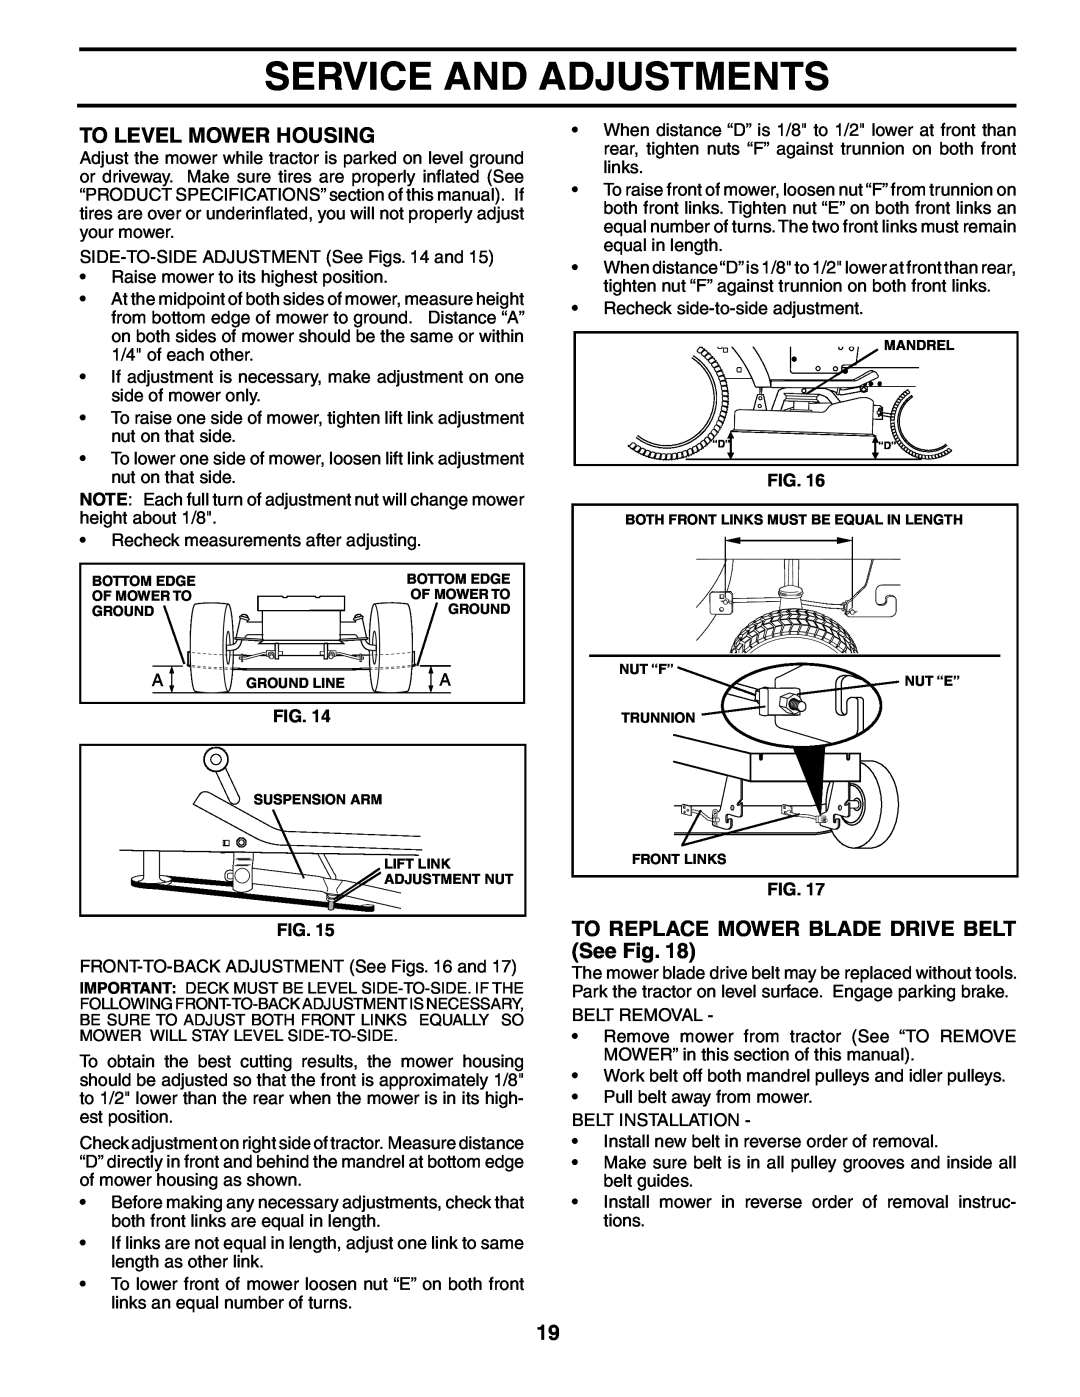 Poulan PO17542STB manual To Level Mower Housing, TO REPLACE MOWER BLADE DRIVE BELT See Fig, Service And Adjustments 